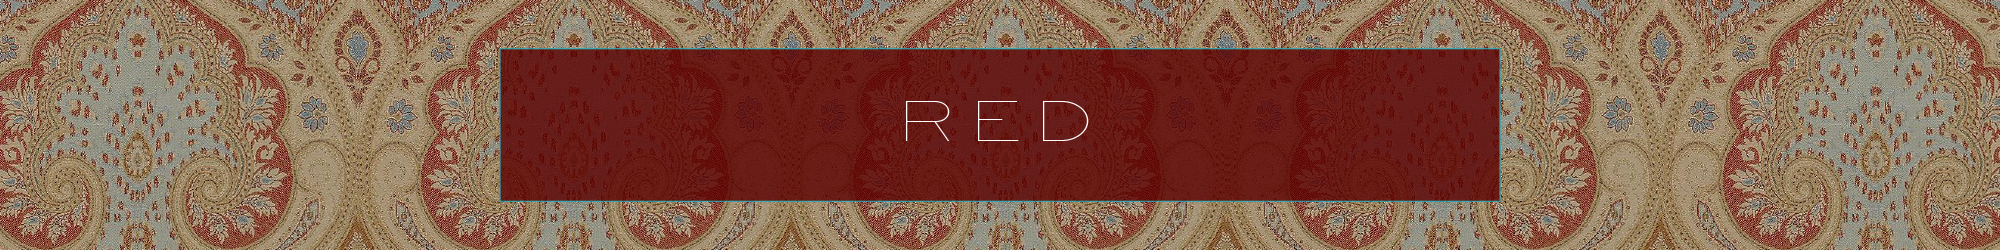 In the words of the inimitable Diana Vreeland: “Red is the great clarifier - bright and revealing. I can't imagine becoming bored with red - it would be like  becoming bored with the person you love”. Enough said.